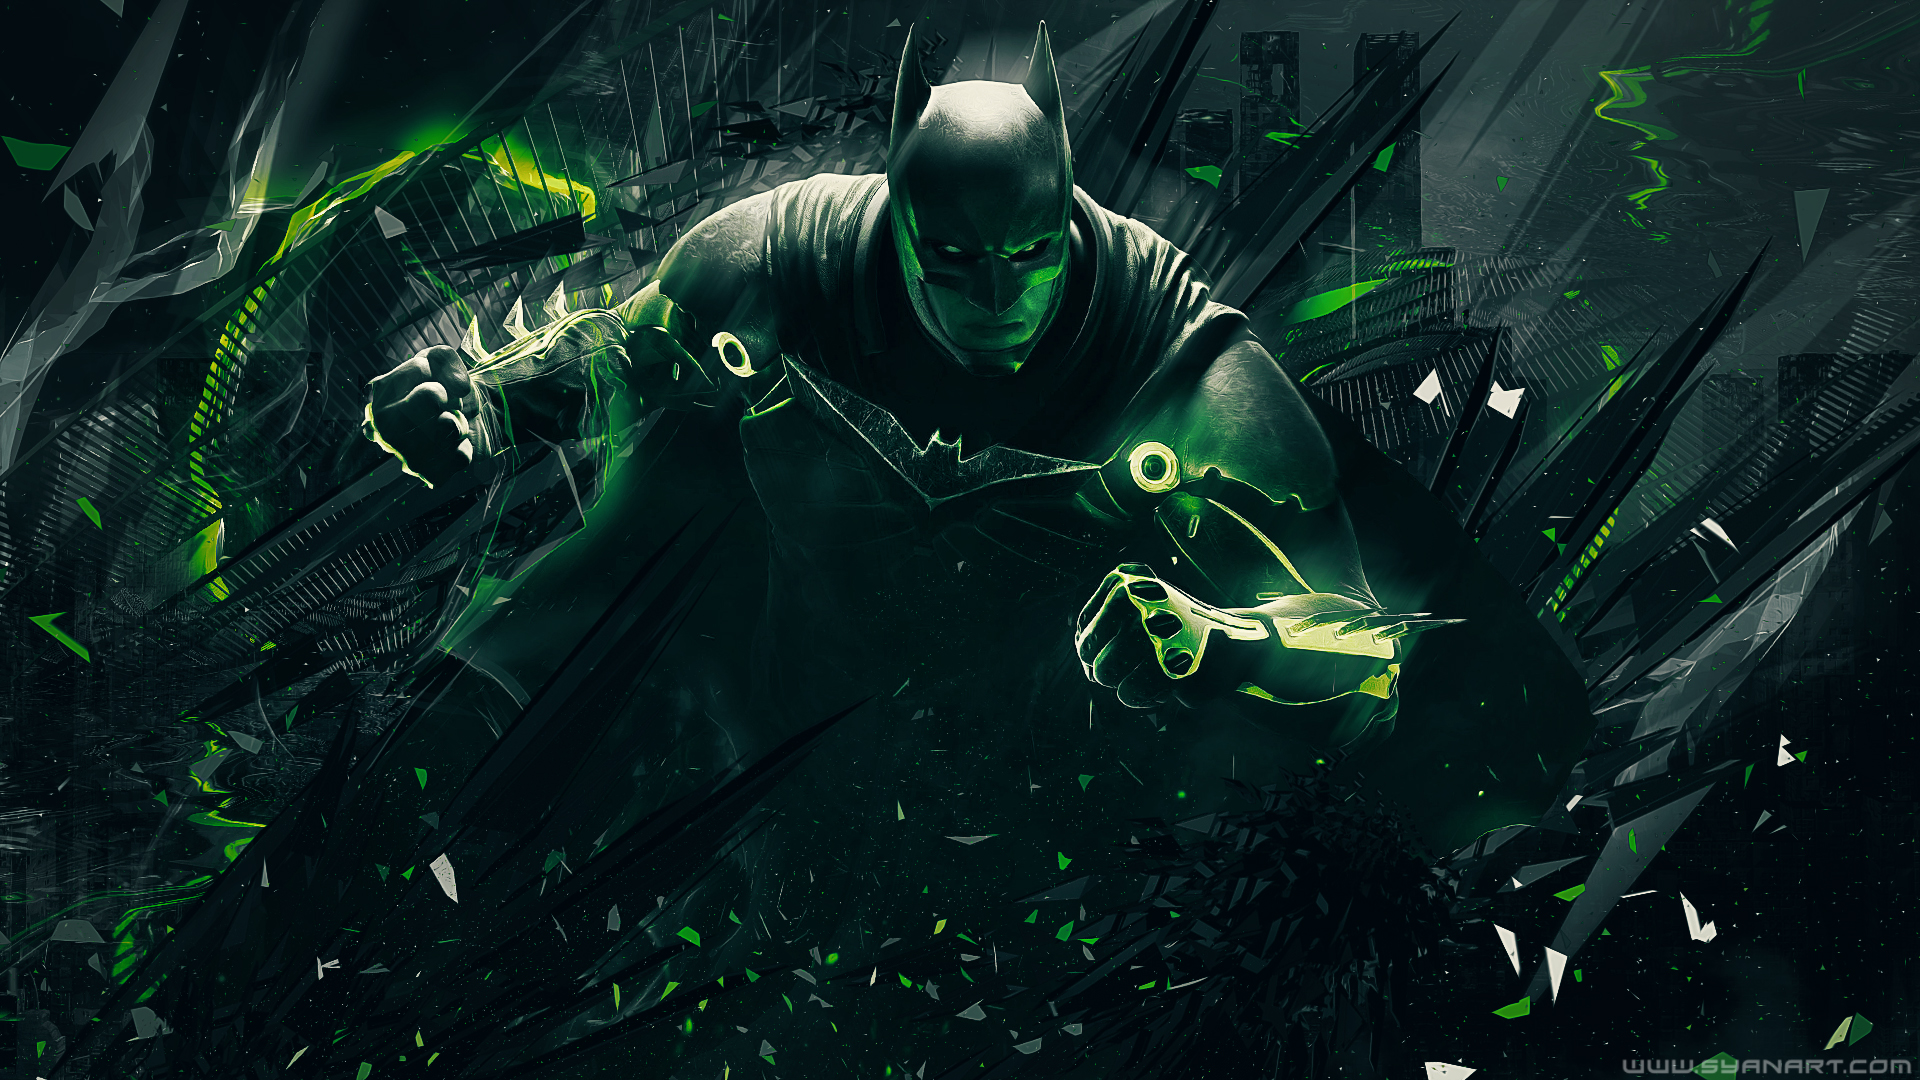 injustice wallpaper,green,action adventure game,games,fictional character,pc game